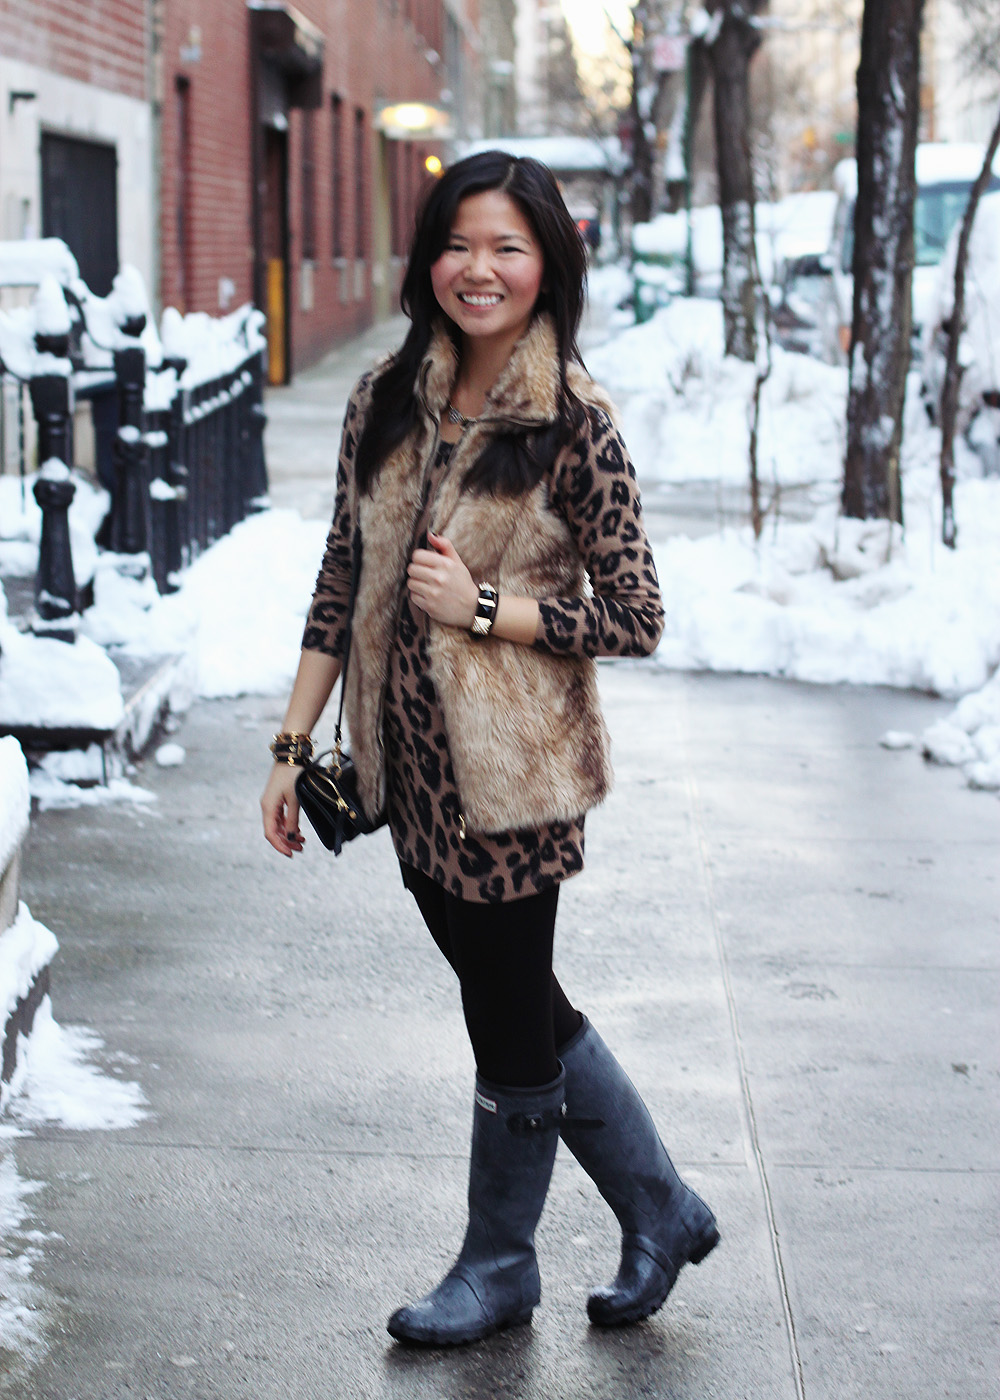 Skirt the Rules; NYC fashion blogger; style blog; winter outfit photos; Banana Republic black wool coat; Zara Girls faux fur vest; Old Navy leopard sweater dress; Uniqlo HeatTech leggings; Hunter shearling lined rain boots; Sequin geometric necklace; C. Wonder skinny cuffs; Juicy Couture pave pyramid bracelet; DVF black crossbody bag